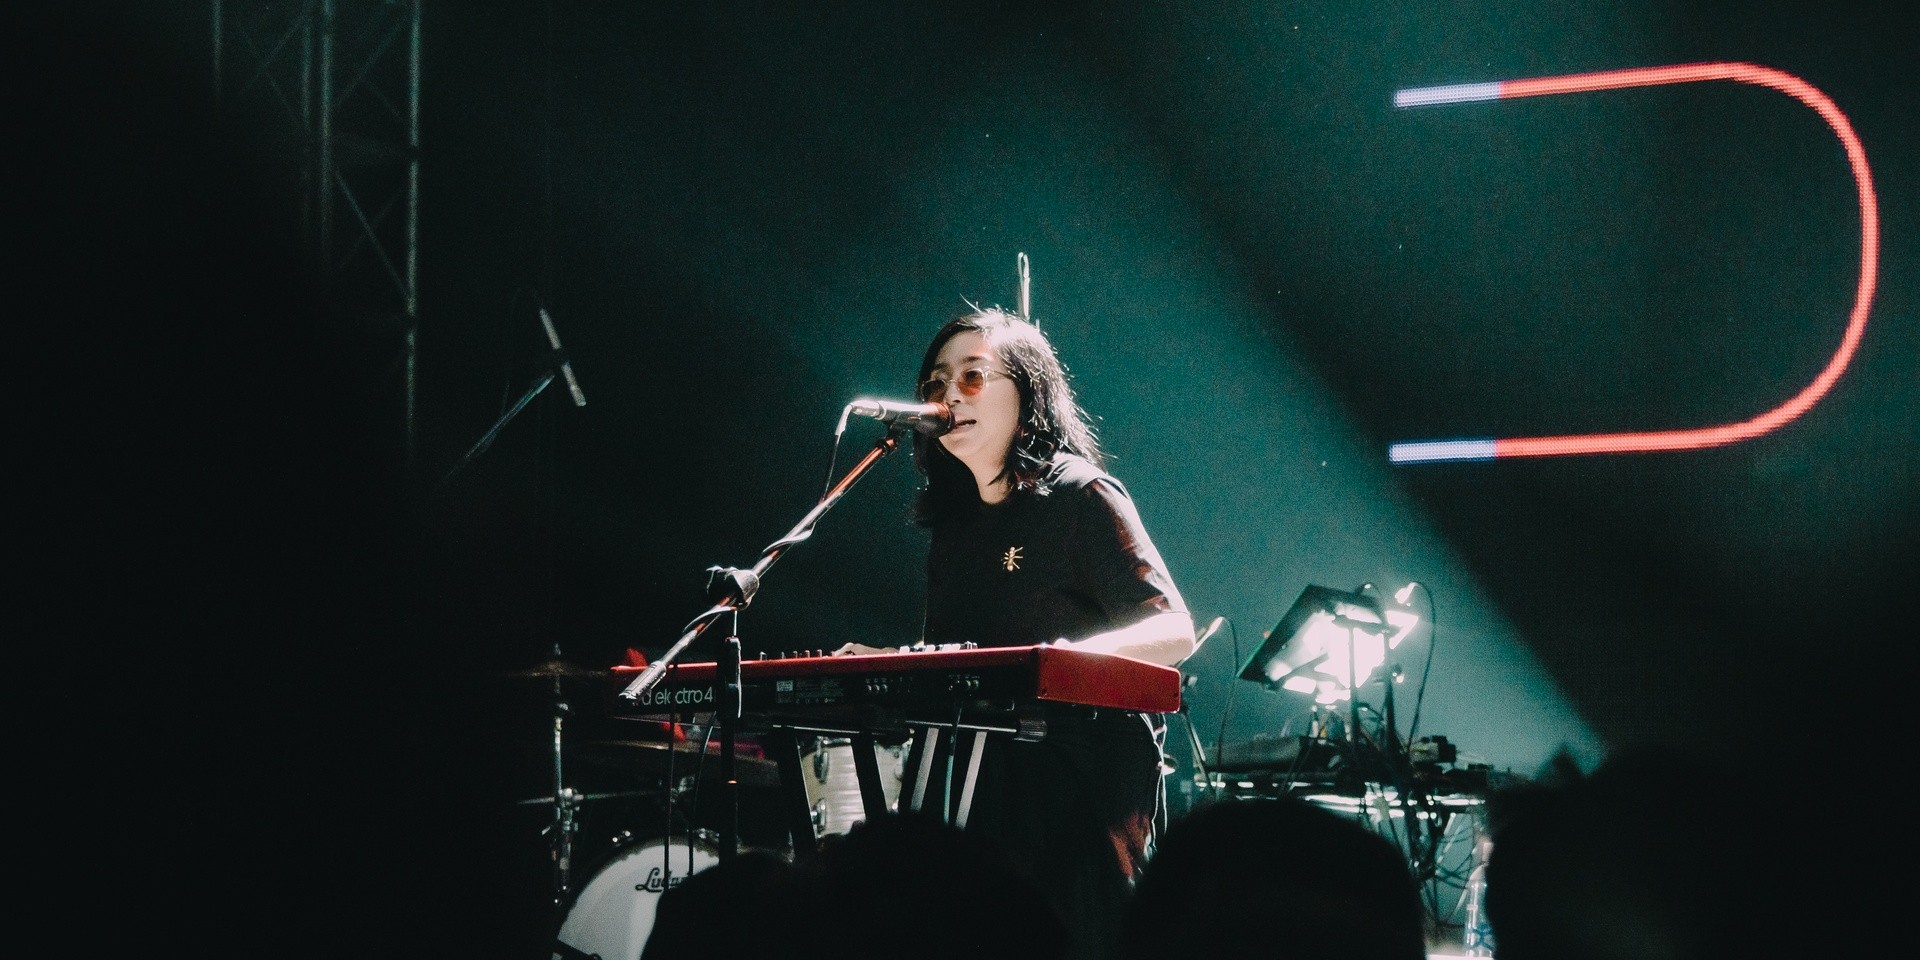 Armi Millare shares new song 'Kapit' in time for Alone/Together screening – listen